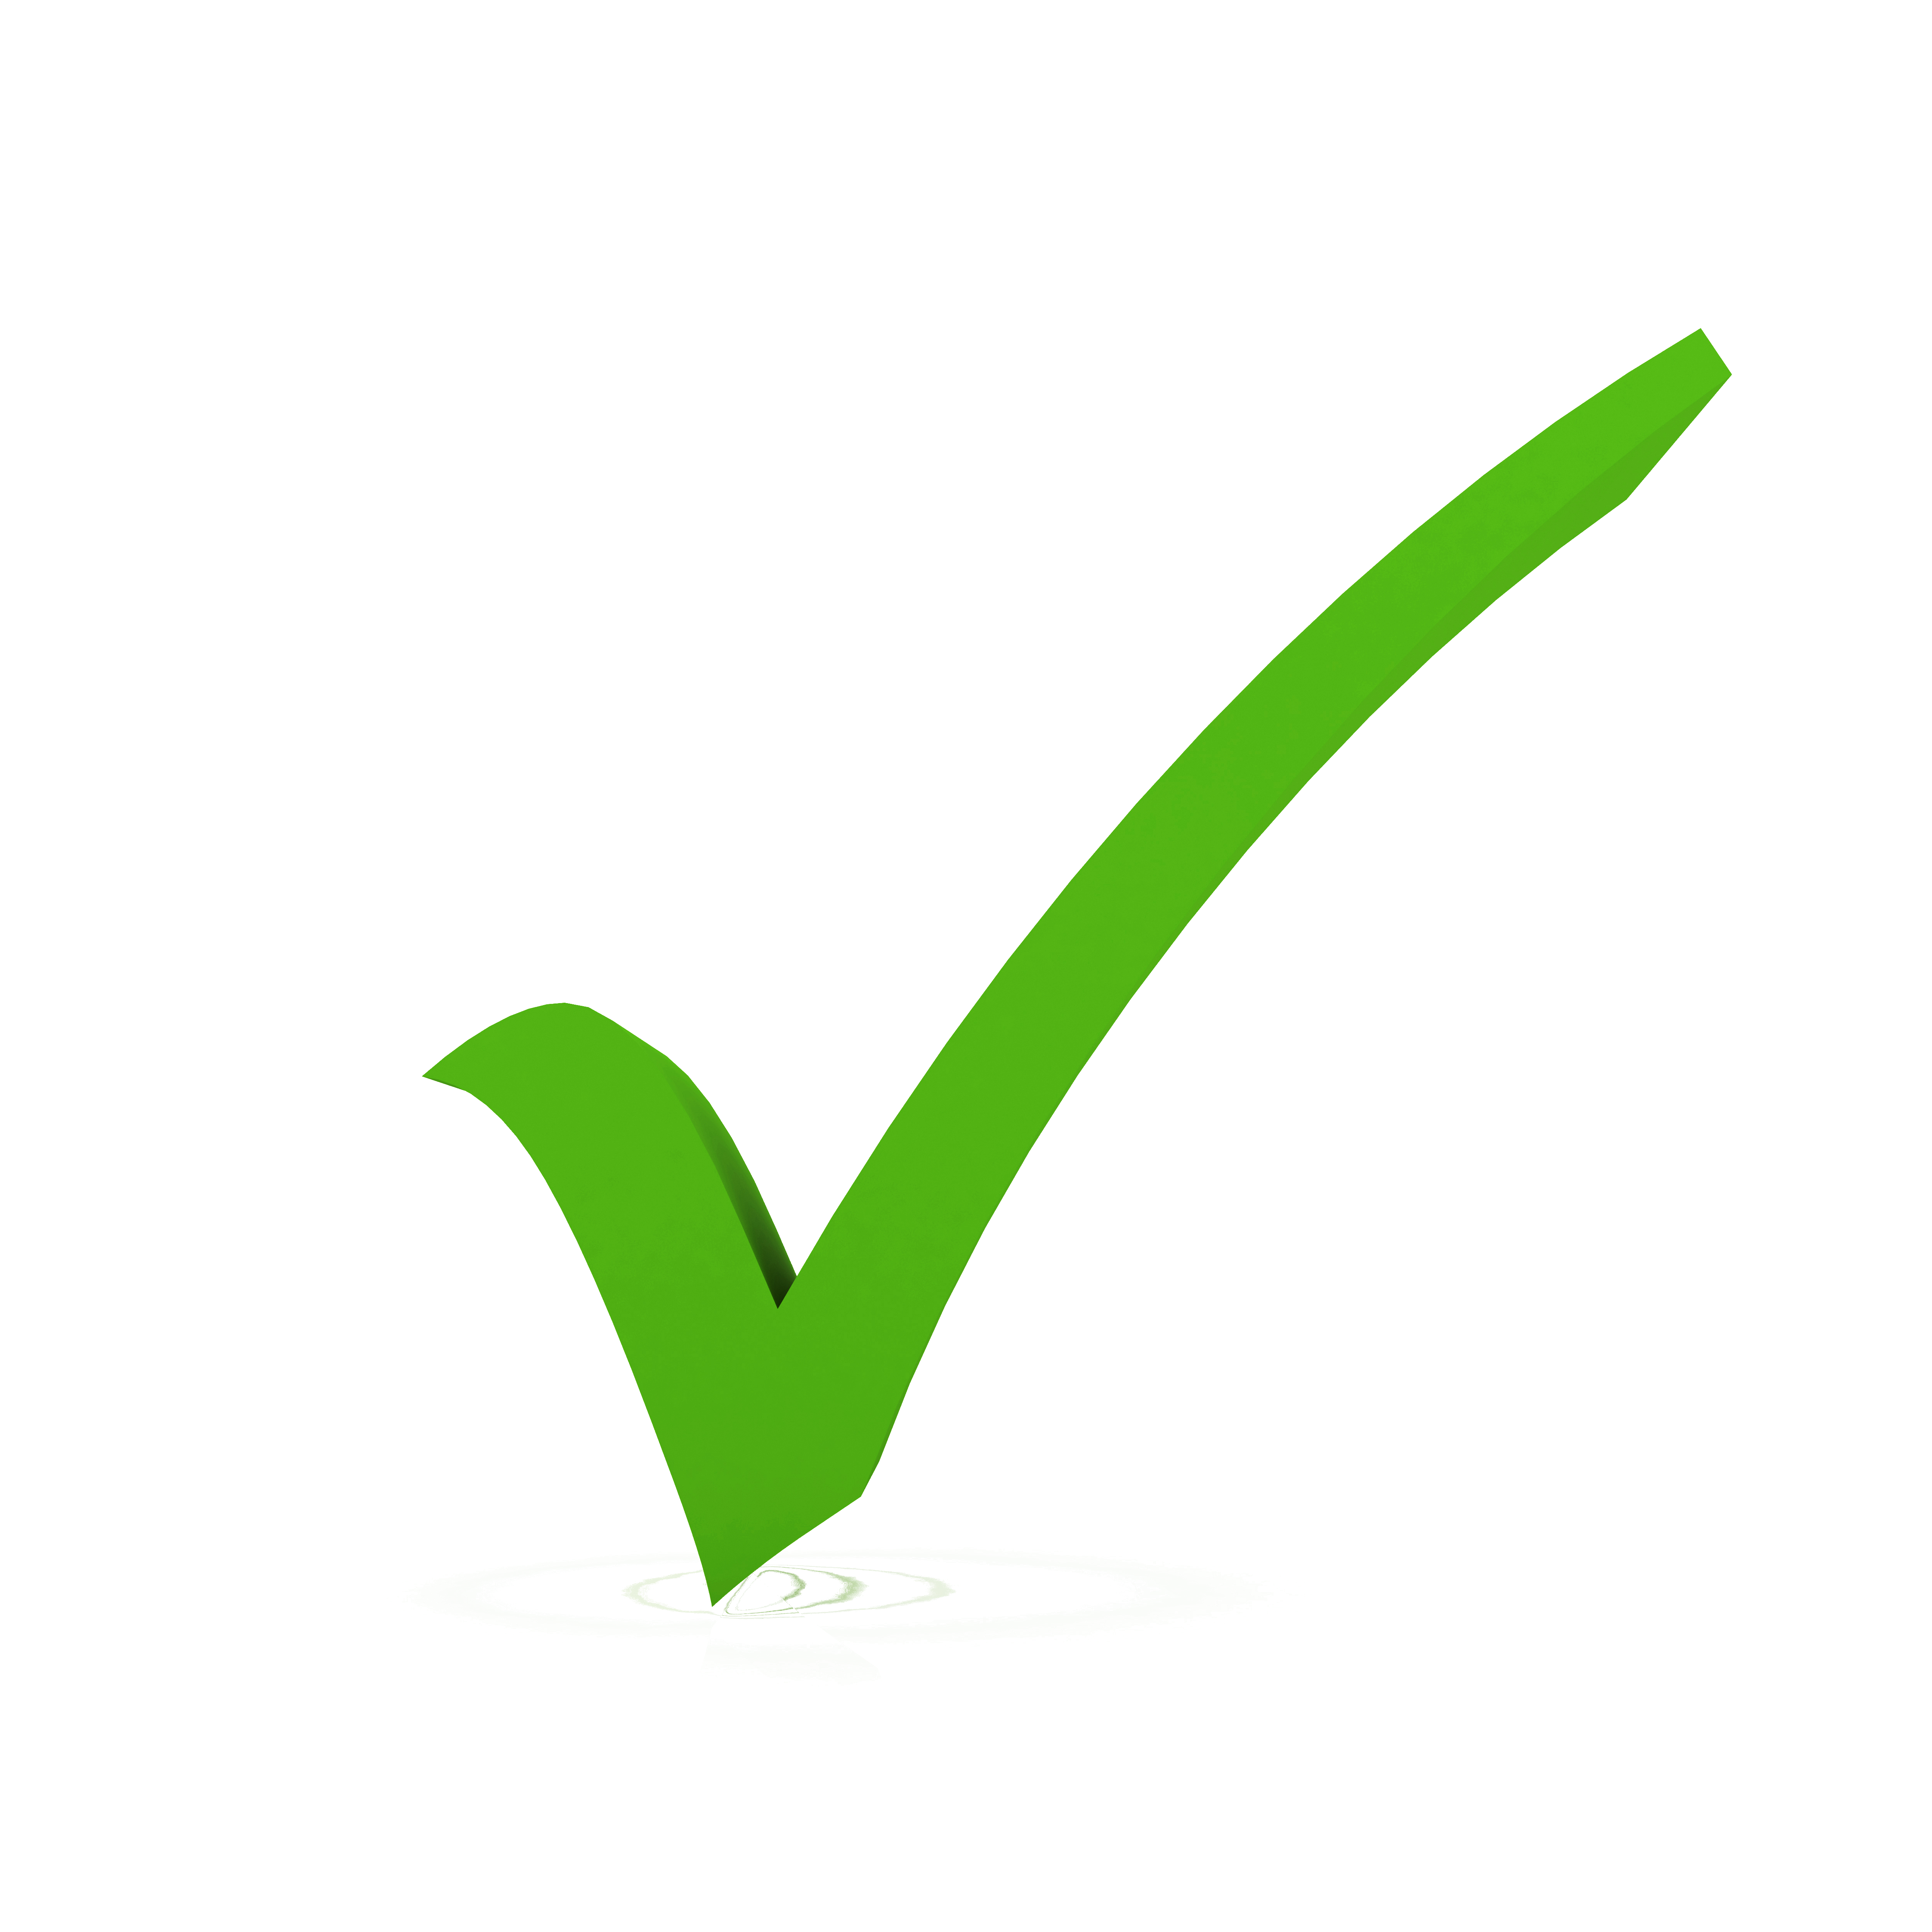 Checkmark Png - ClipArt Best